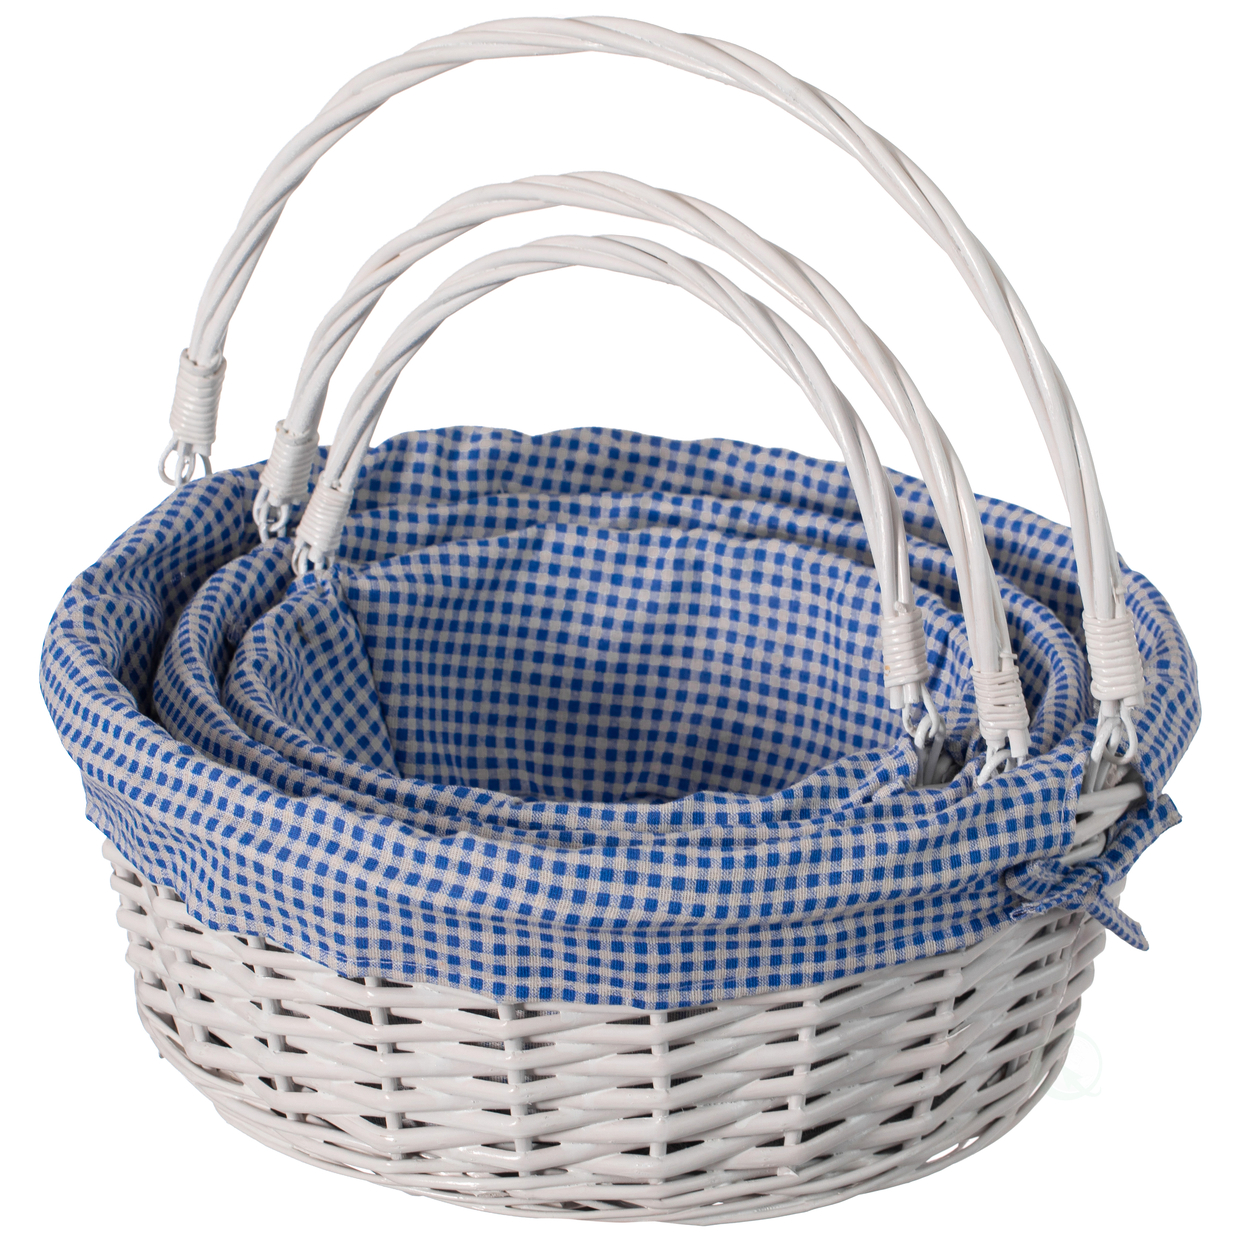 Traditional White Round Willow Gift Basket With Gingham Liner And Sturdy Foldable Handles, Food Snacks Storage Basket - Blue, Set Of 3